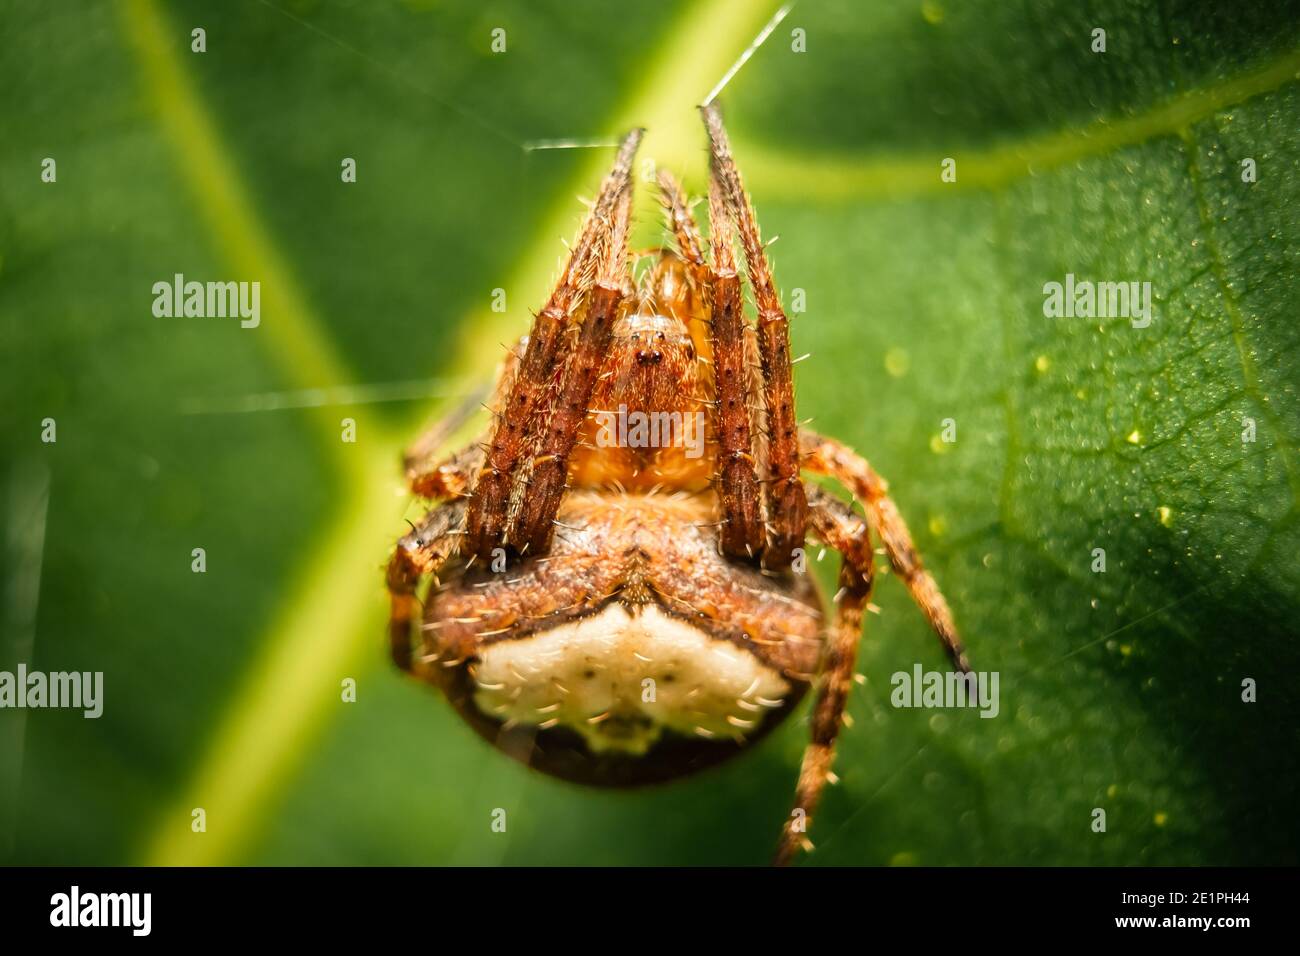 Macro Stock Image - Jumping spider on leaf extreme close up. Macro photo of jumper Spider on green leaf isolated green background. Stock Photo